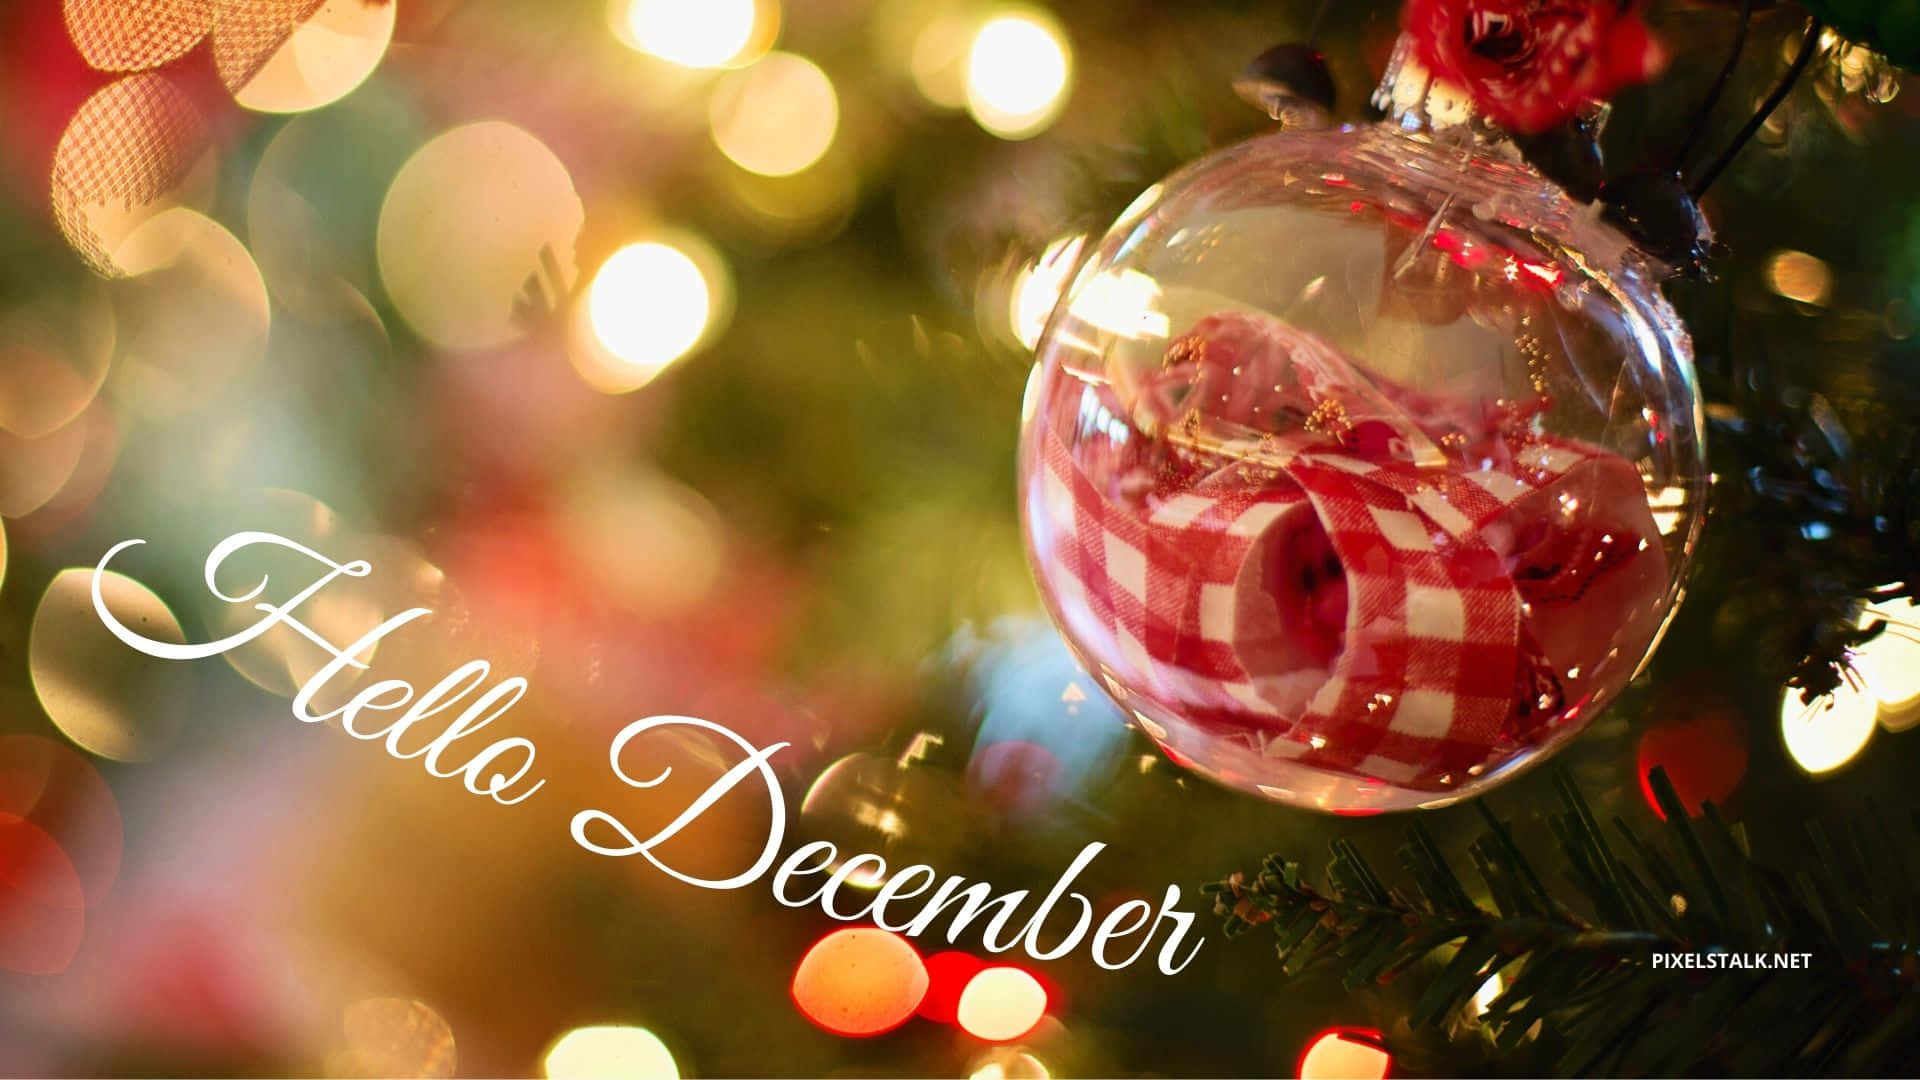 "Say Goodbye to November and Welcome December!" Wallpaper